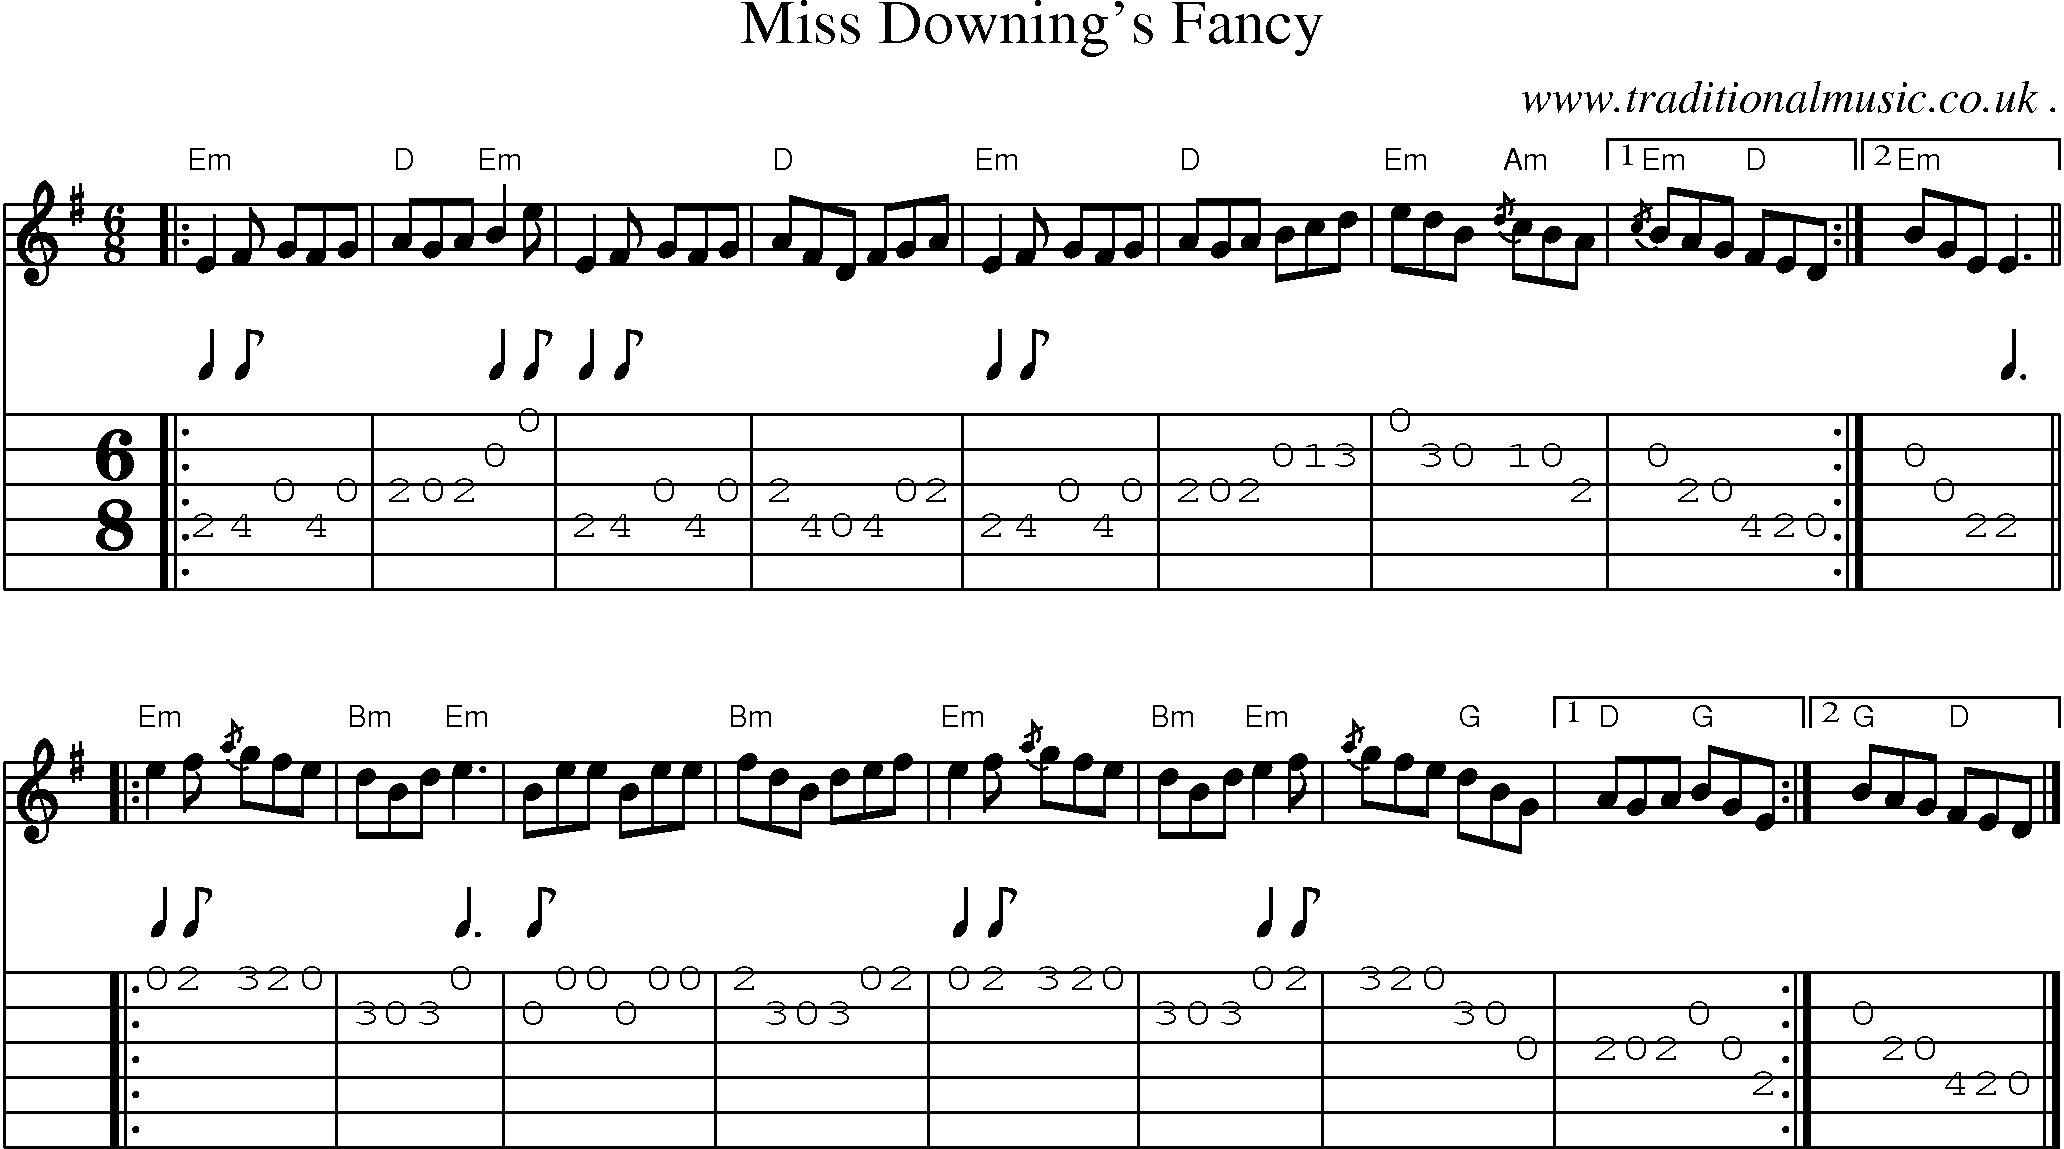 Sheet-music  score, Chords and Guitar Tabs for Miss Downings Fancy